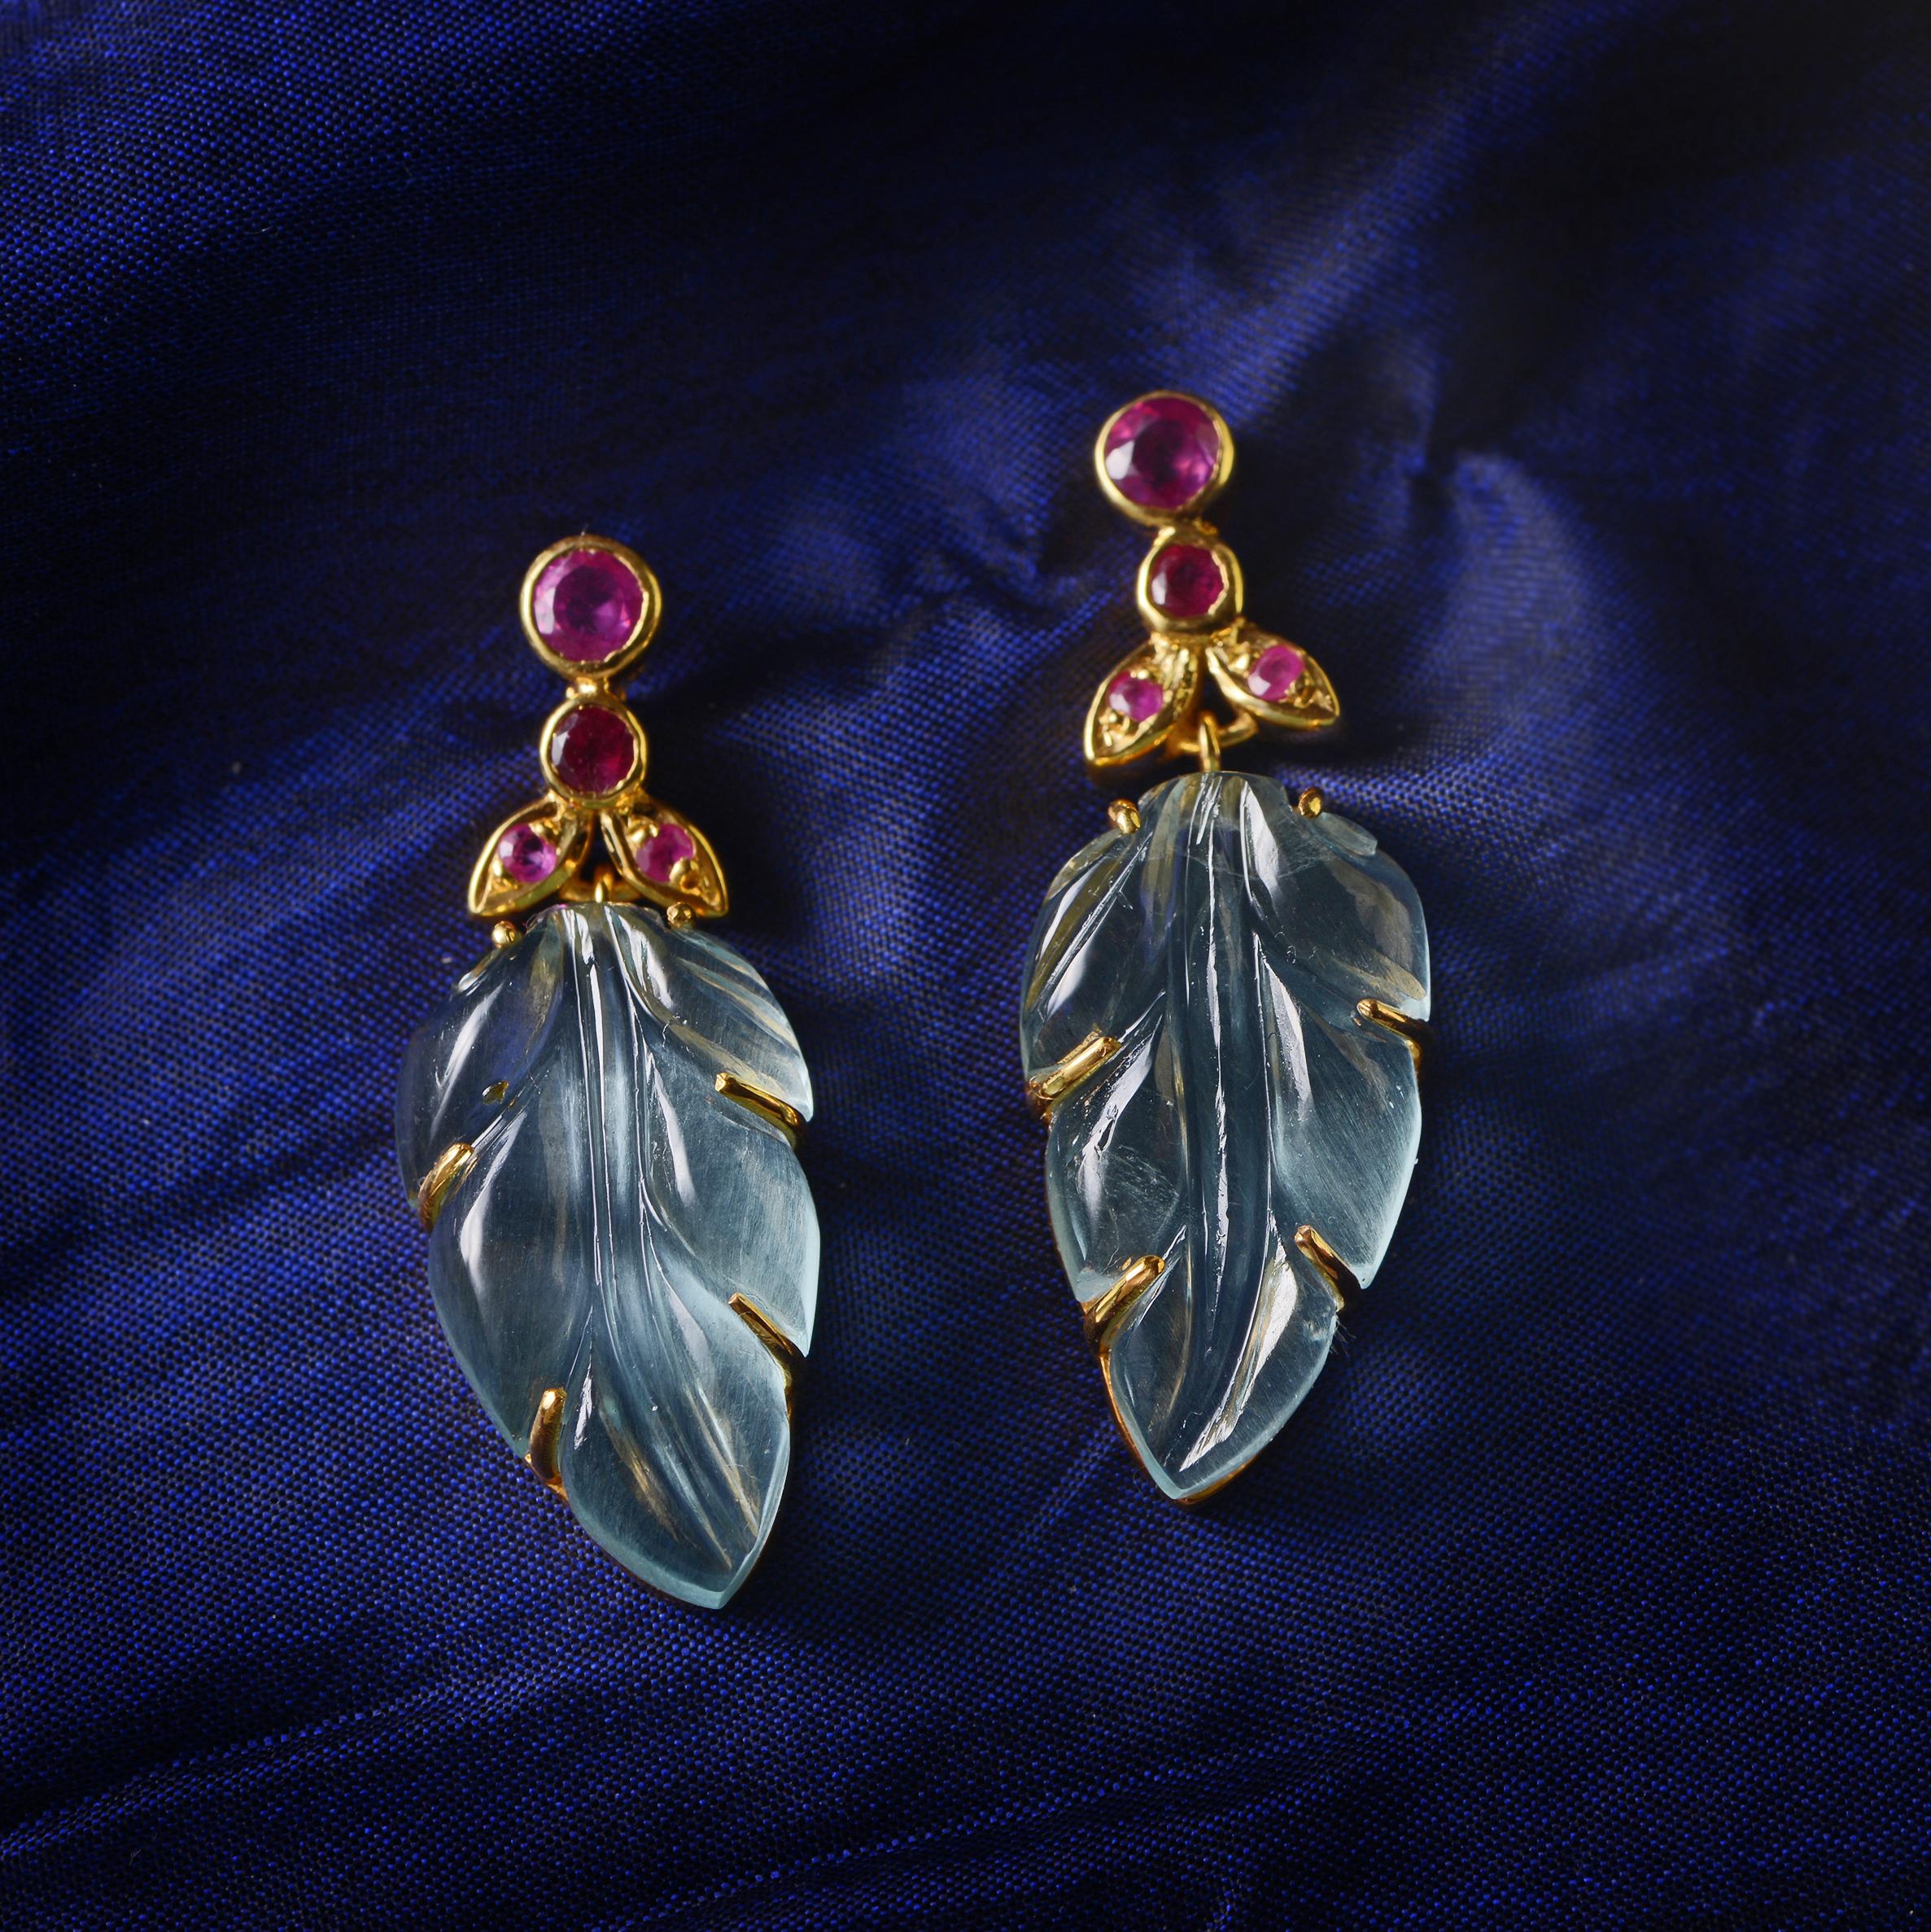 Using the ancient art of stone carving these exquisite one-of-a-kind aquamarine earrings have been hand-carved and hand-engraved in our workshops. They are made in sterling silver coated in 24k gold vermeil and are embedded with rubies. They have a